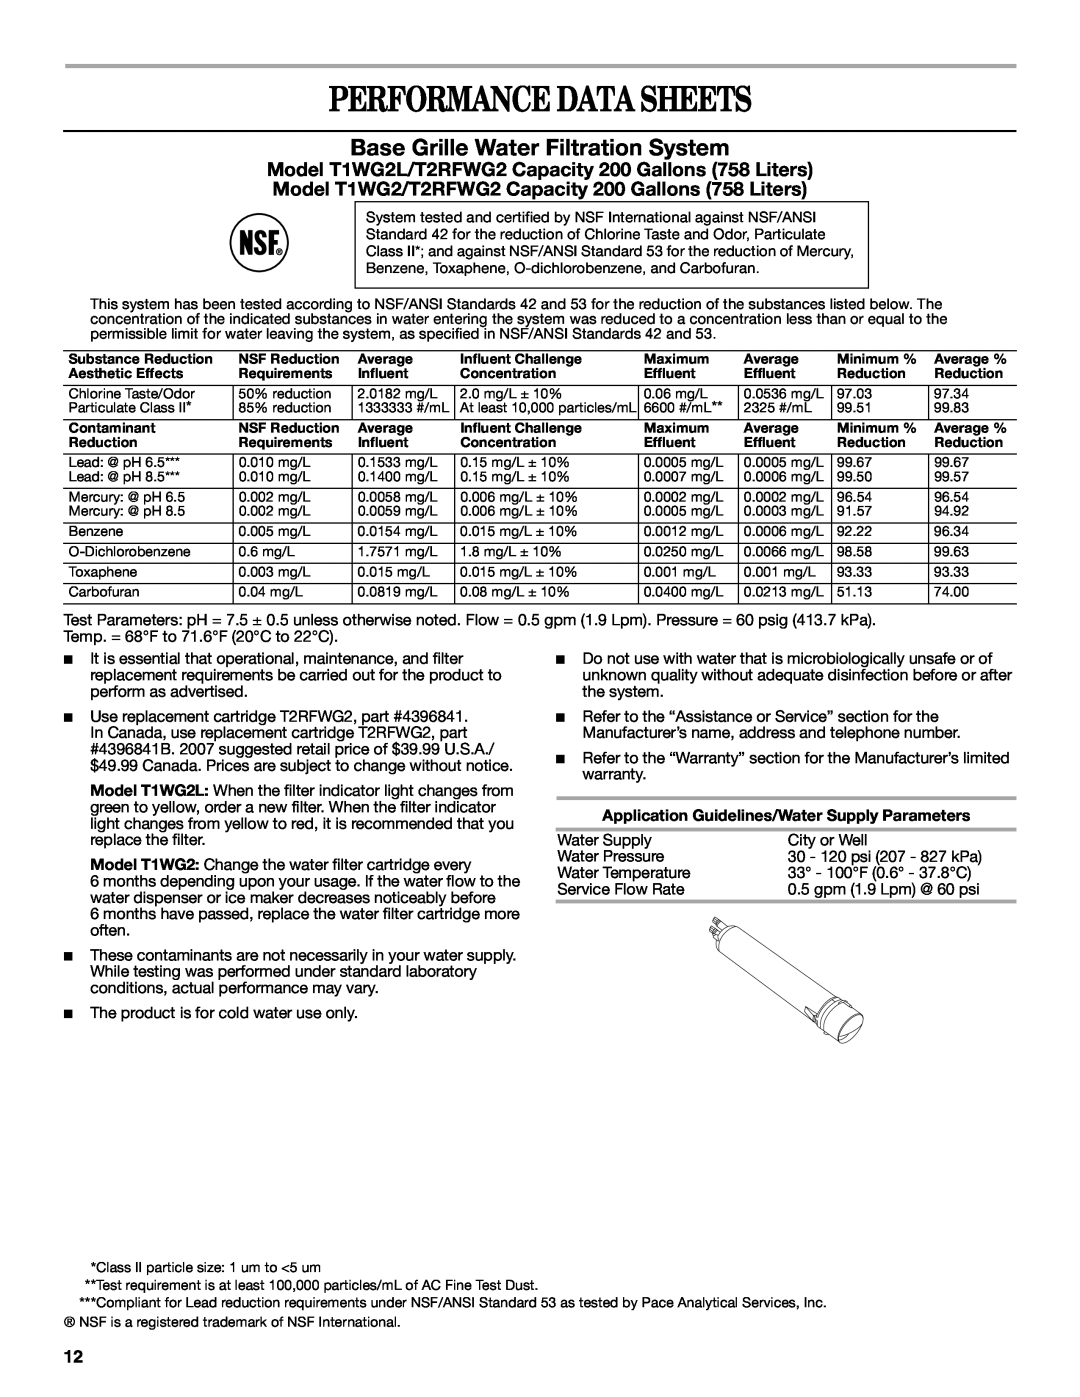 Whirlpool ED5LVAXV warranty Performance Data Sheets, Base Grille Water Filtration System 